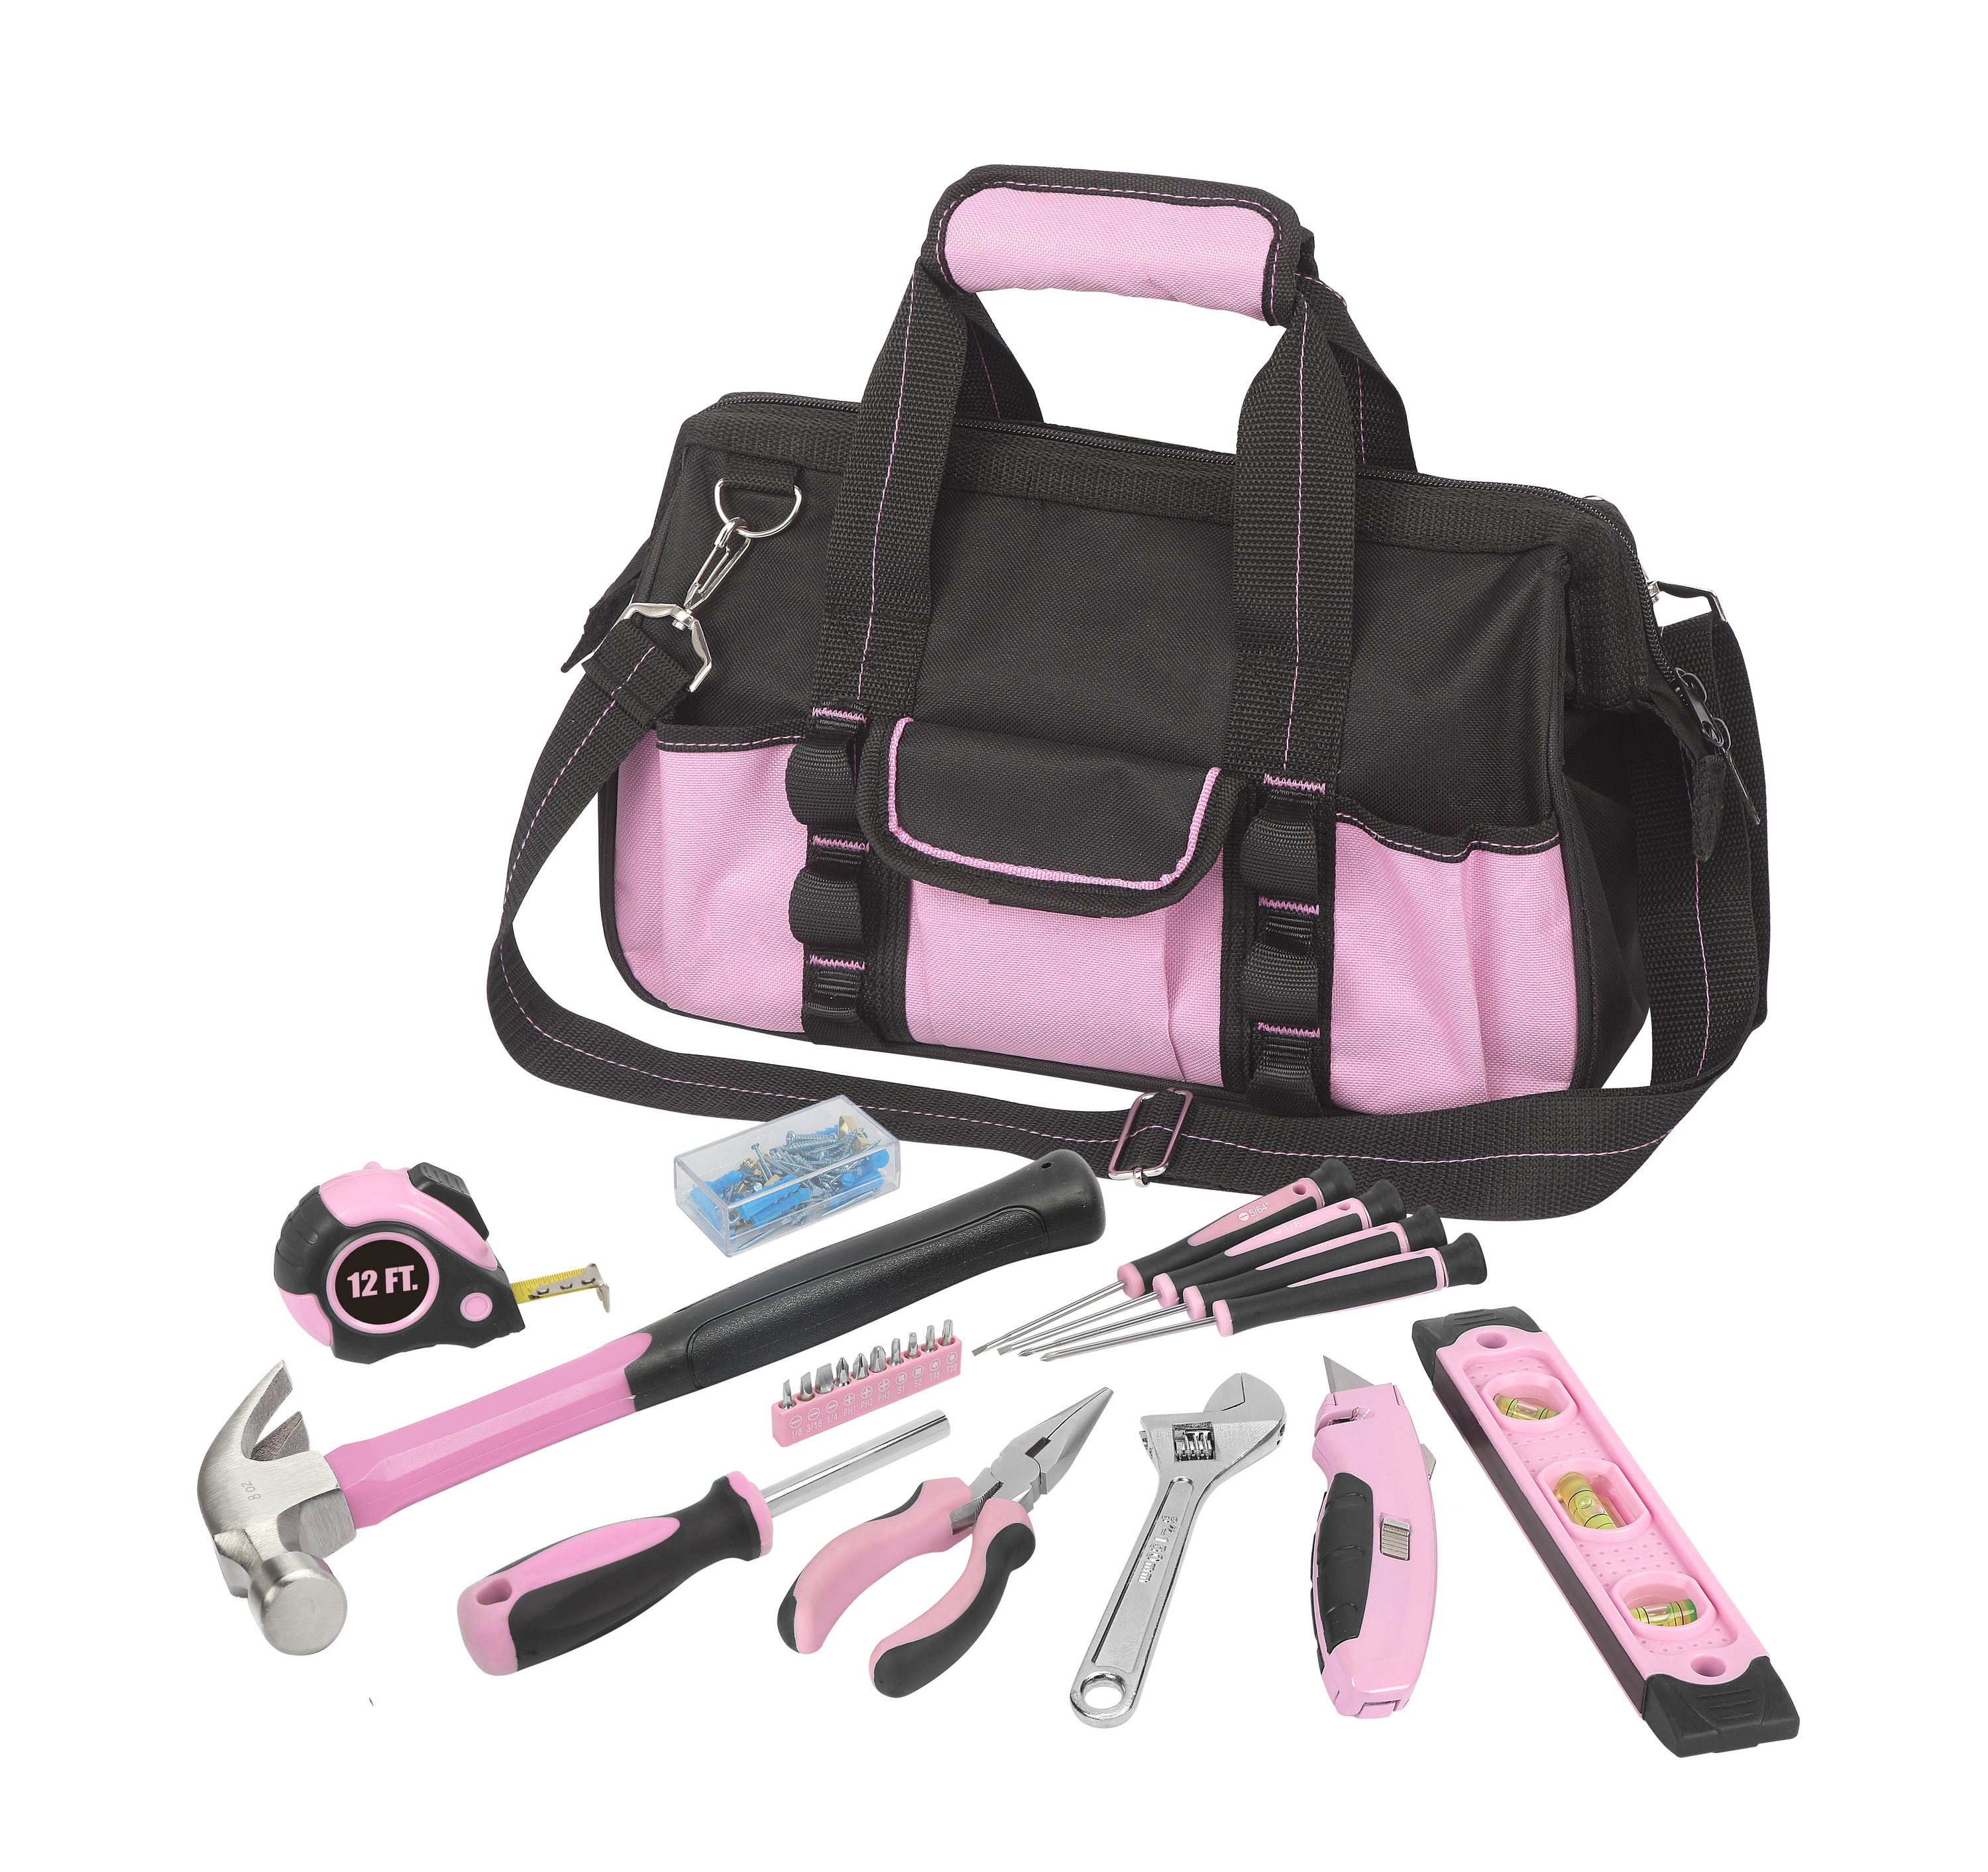 The Original Pink Box 40-Piece Tool Set w/ Bag Only $31 on Lowes